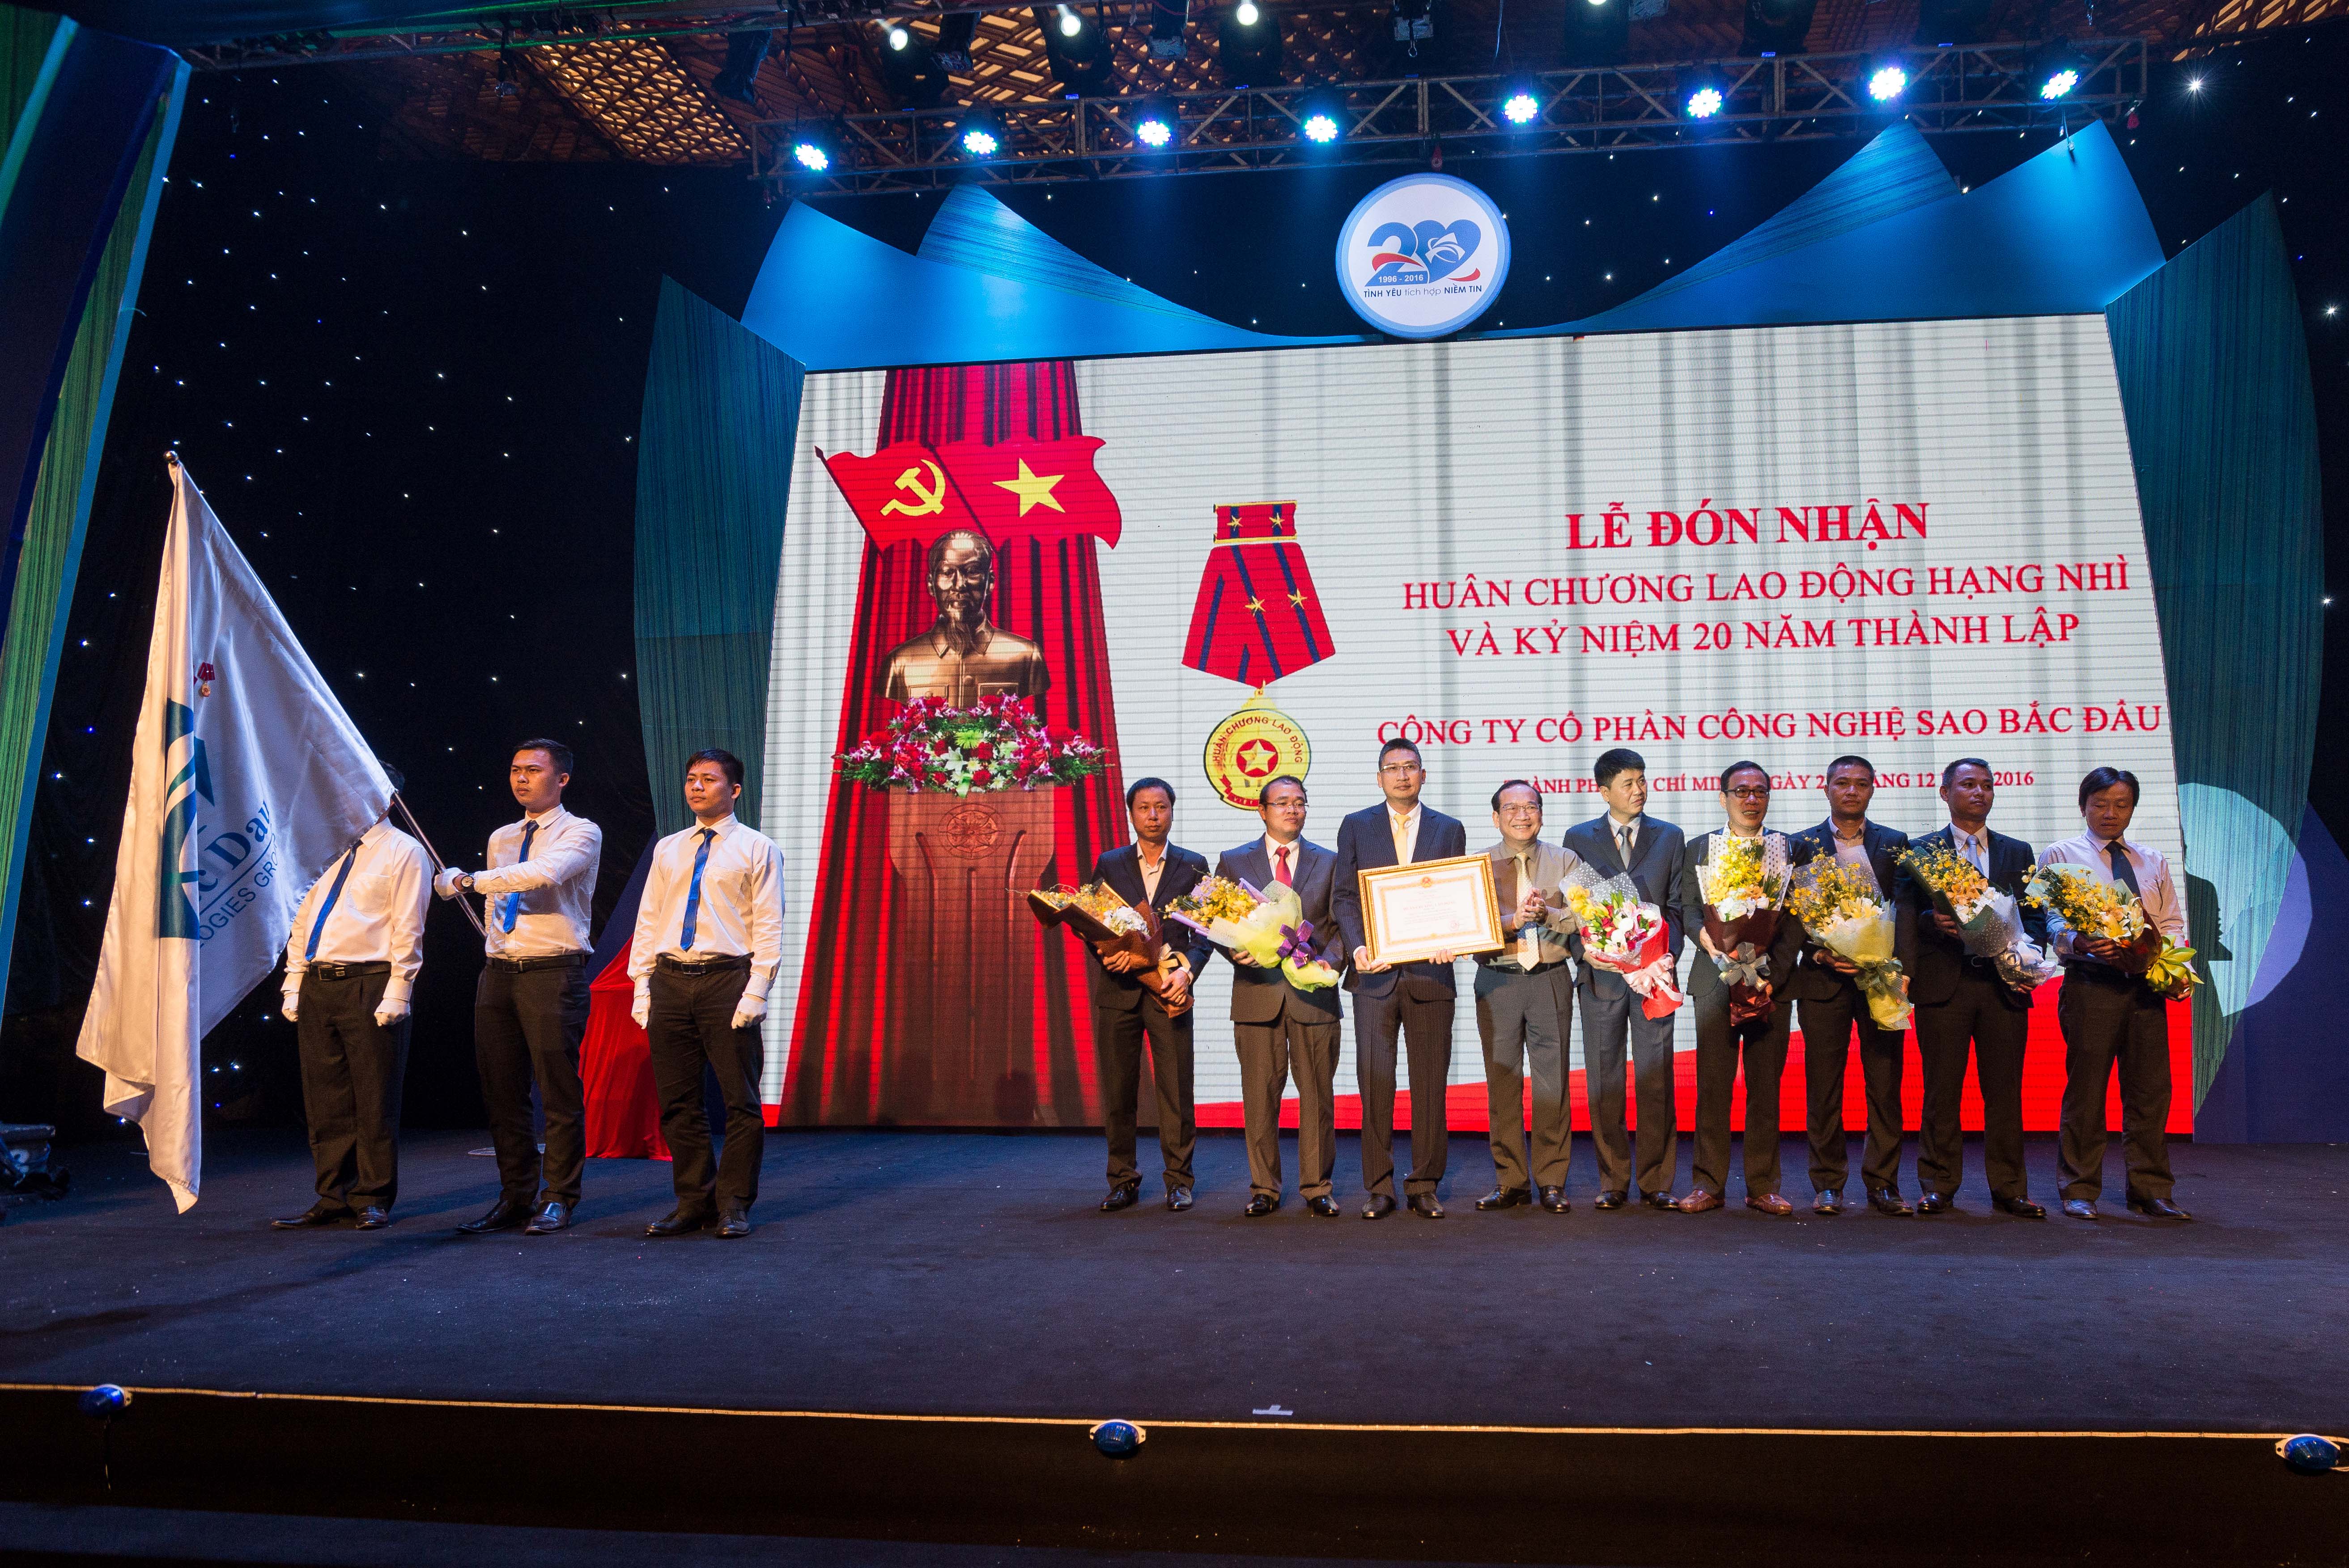 Sao Bac Dau Technology Joint Stock Company Received The Second Labor Medal And The 20th Anniversary Of Its Establishment